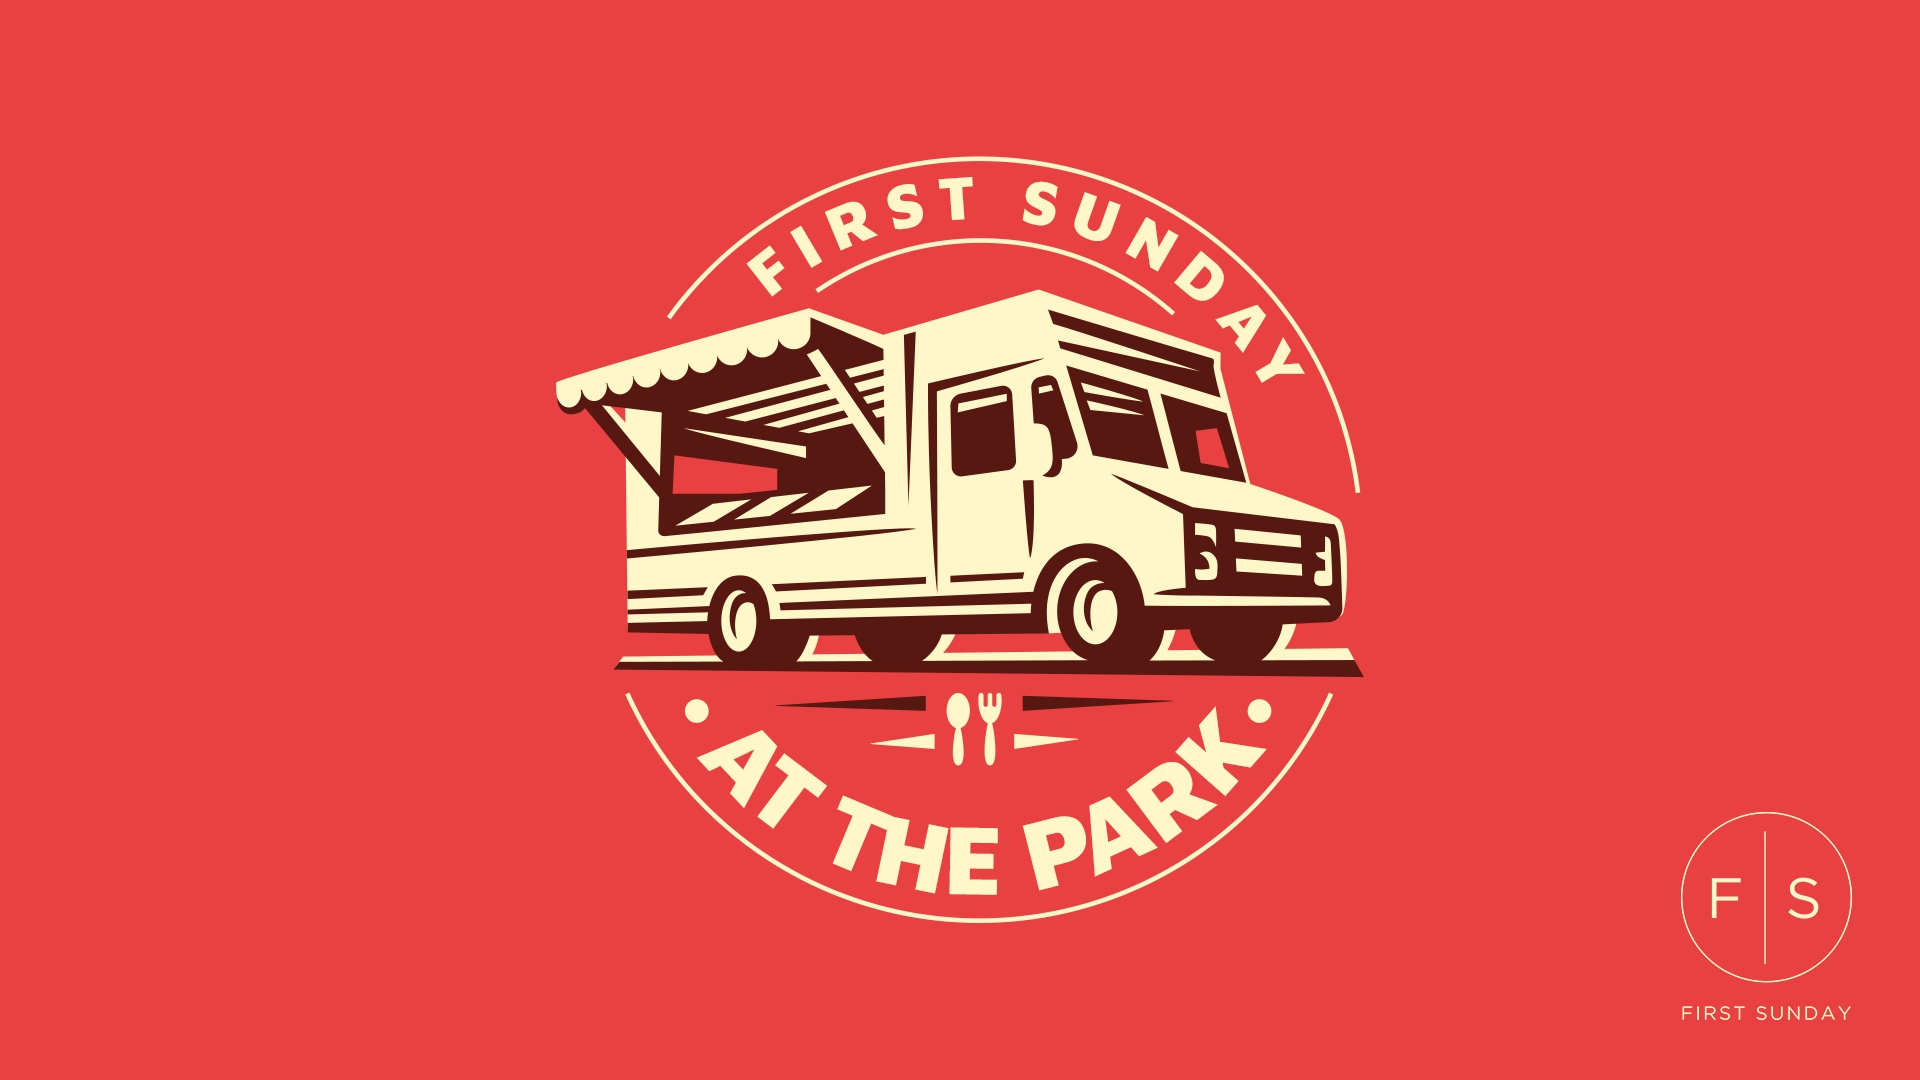 Promo image for first Sunday in the part